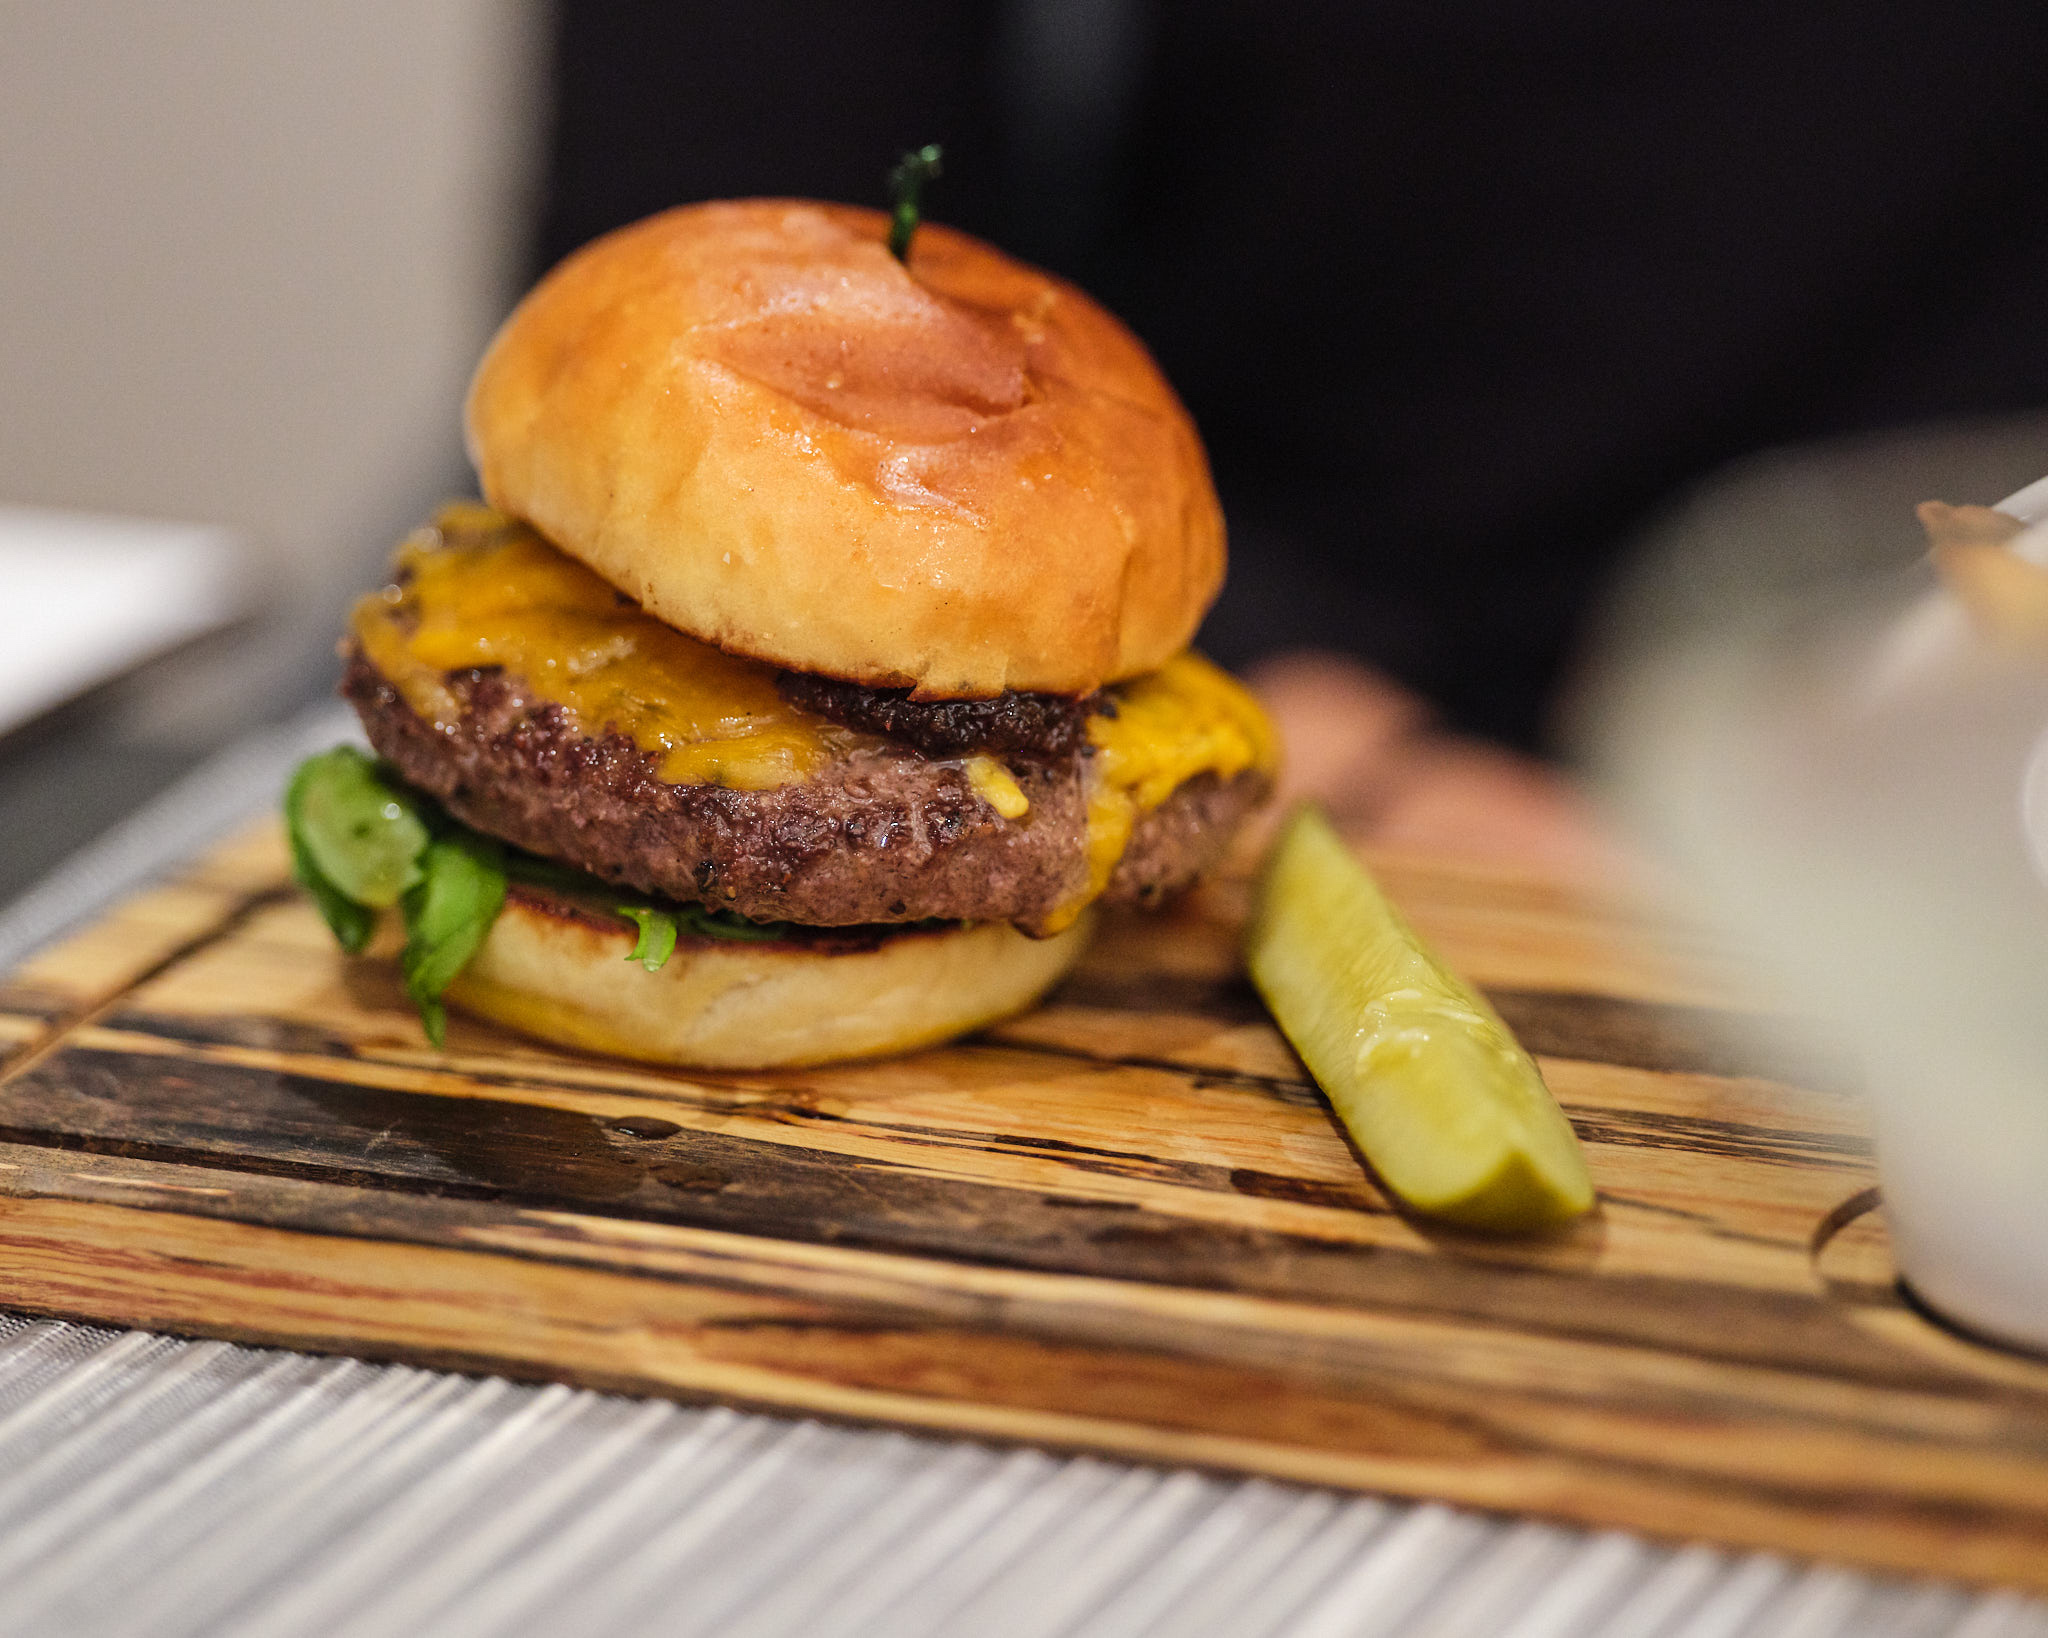 a cheeseburger on a wooden board